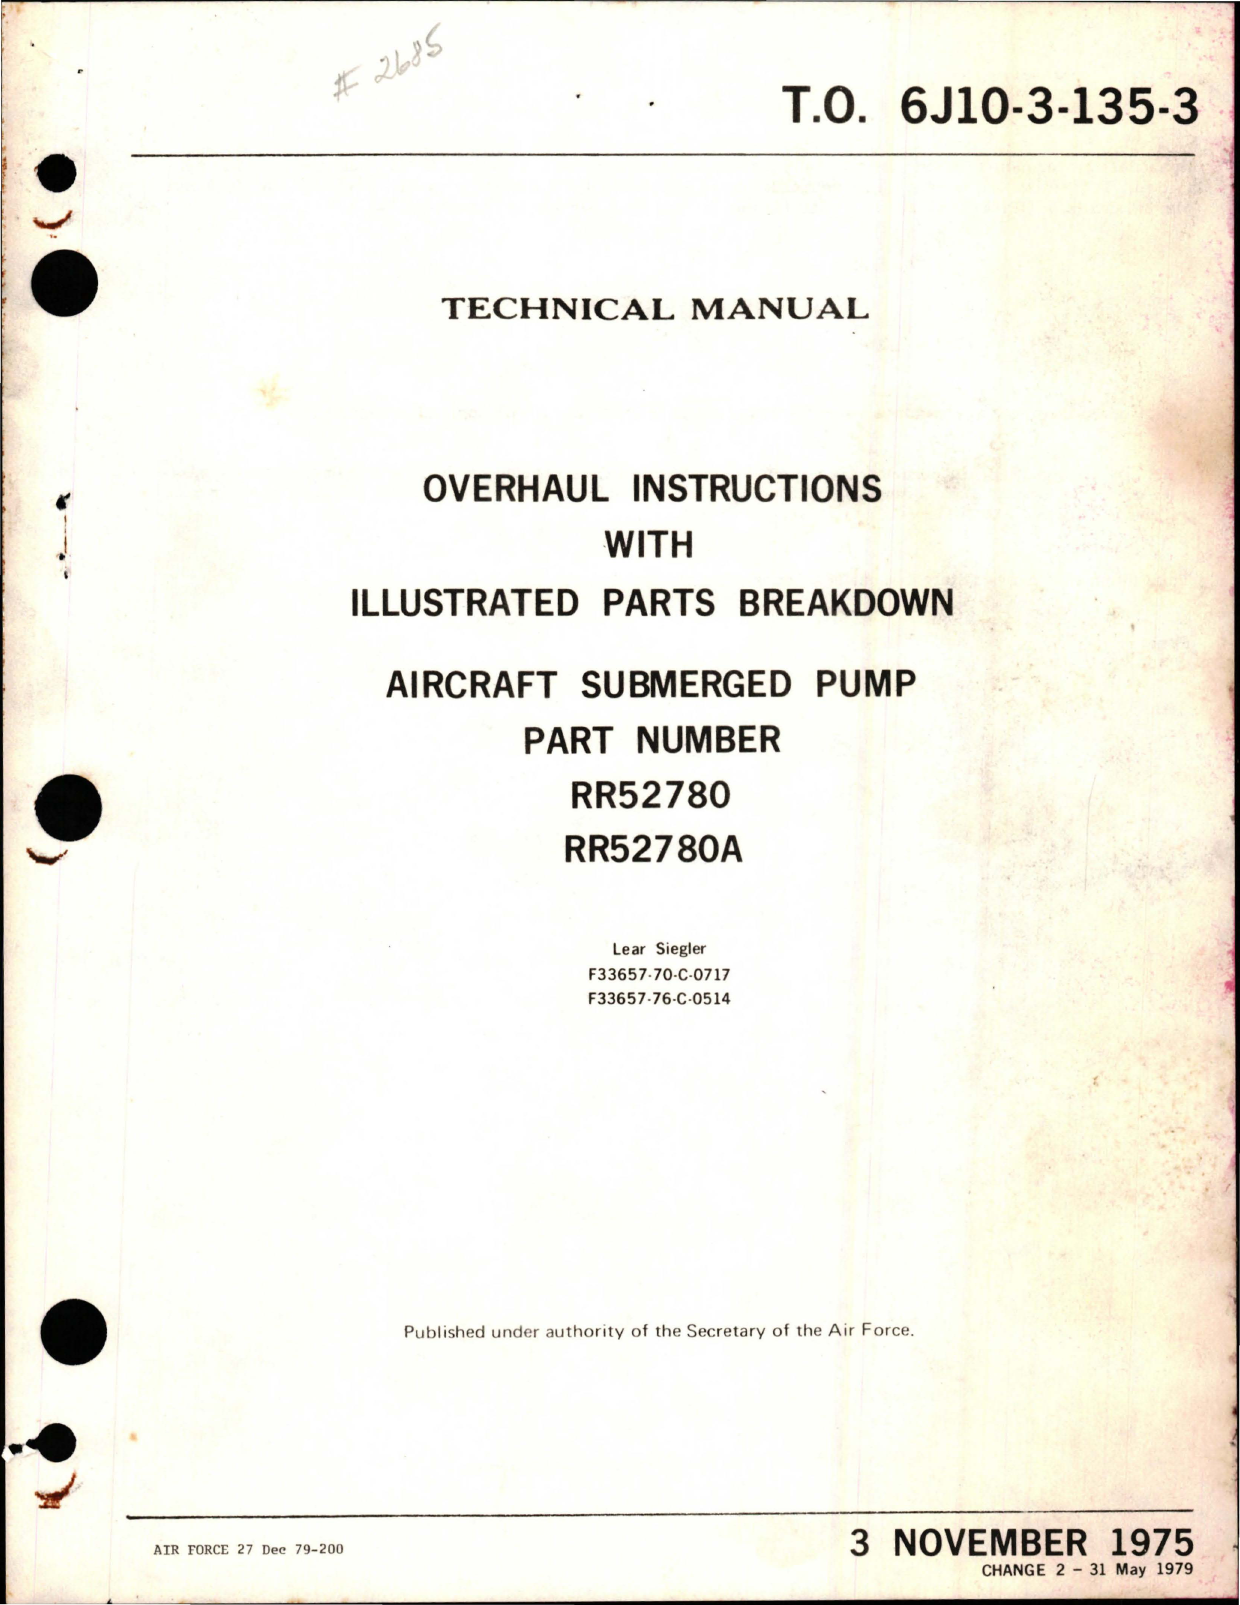 Sample page 1 from AirCorps Library document: Overhaul Instructions with Parts Breakdown for Submerged Pump - Parts RR52780, RR52780A 